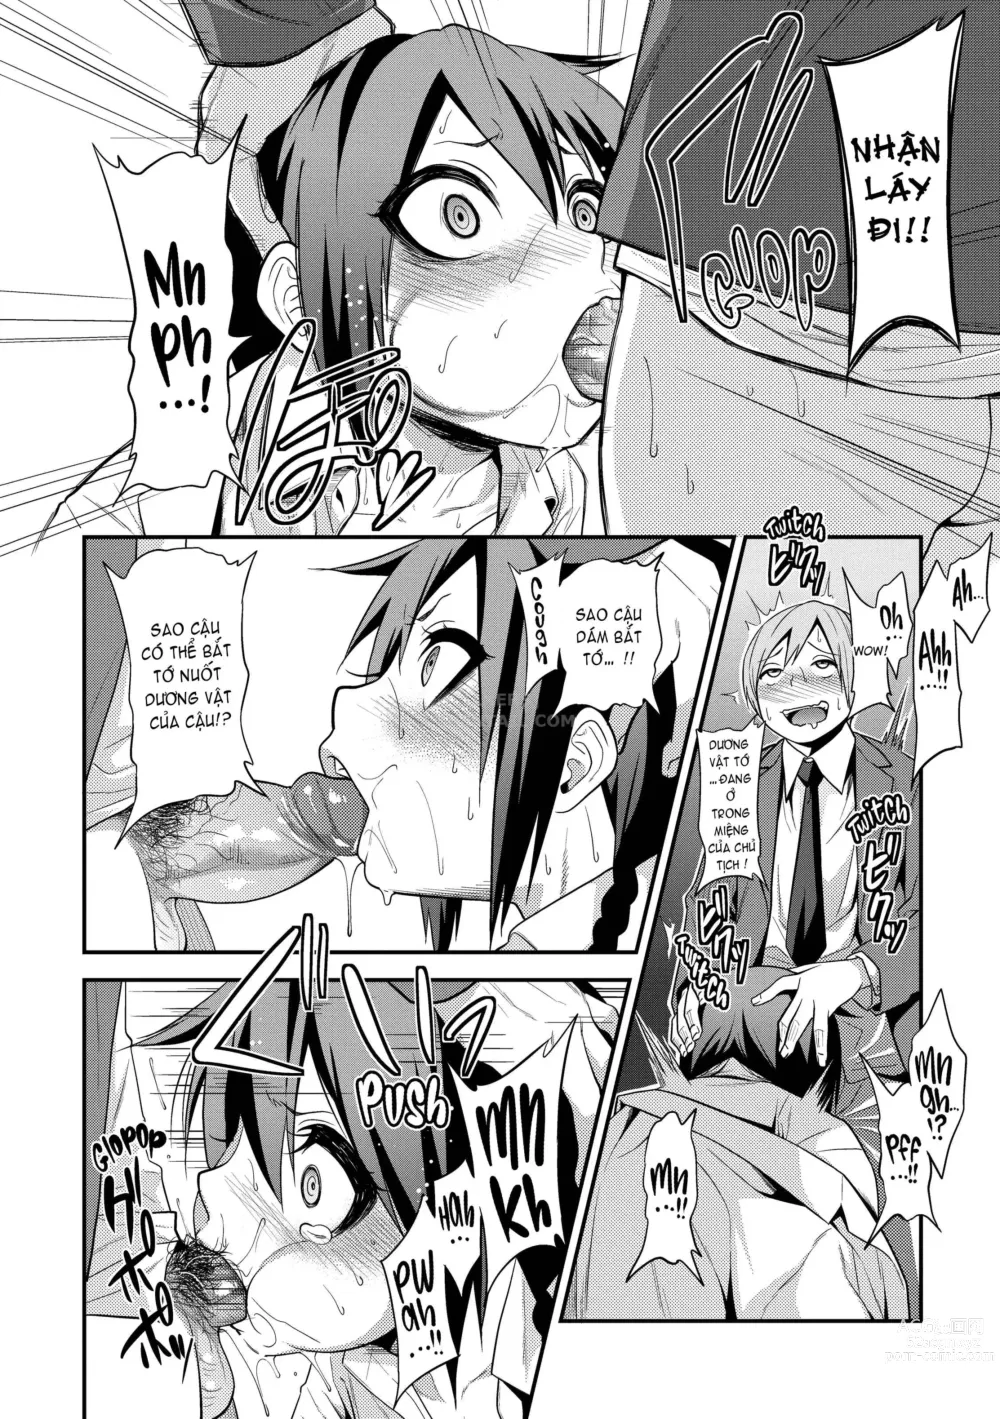 Page 185 of doujinshi Kogals, Sluts, and Whatever